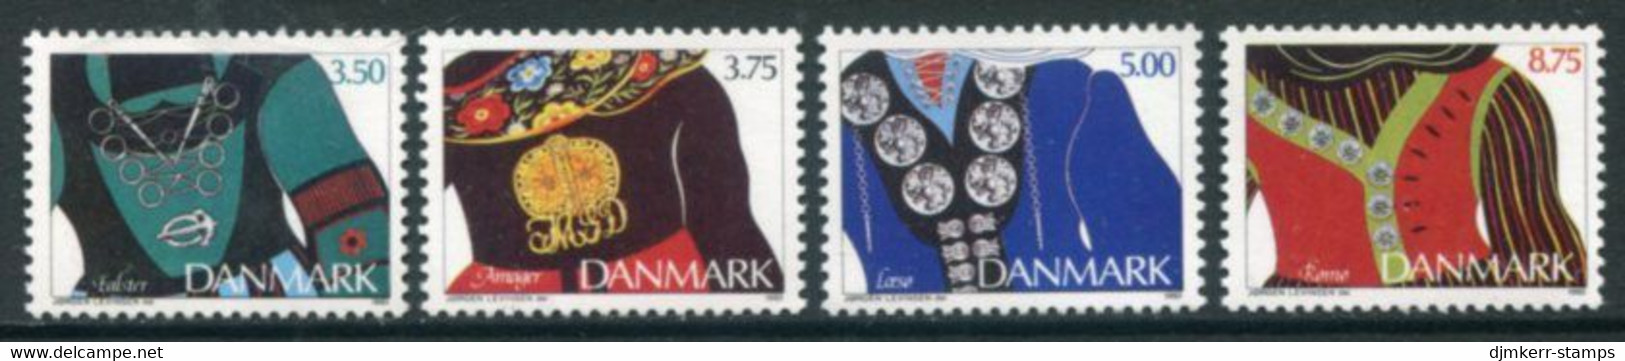 DENMARK 1993 Traditional Costume Decoaration MNH / **. Michel 1064-67 - Unused Stamps